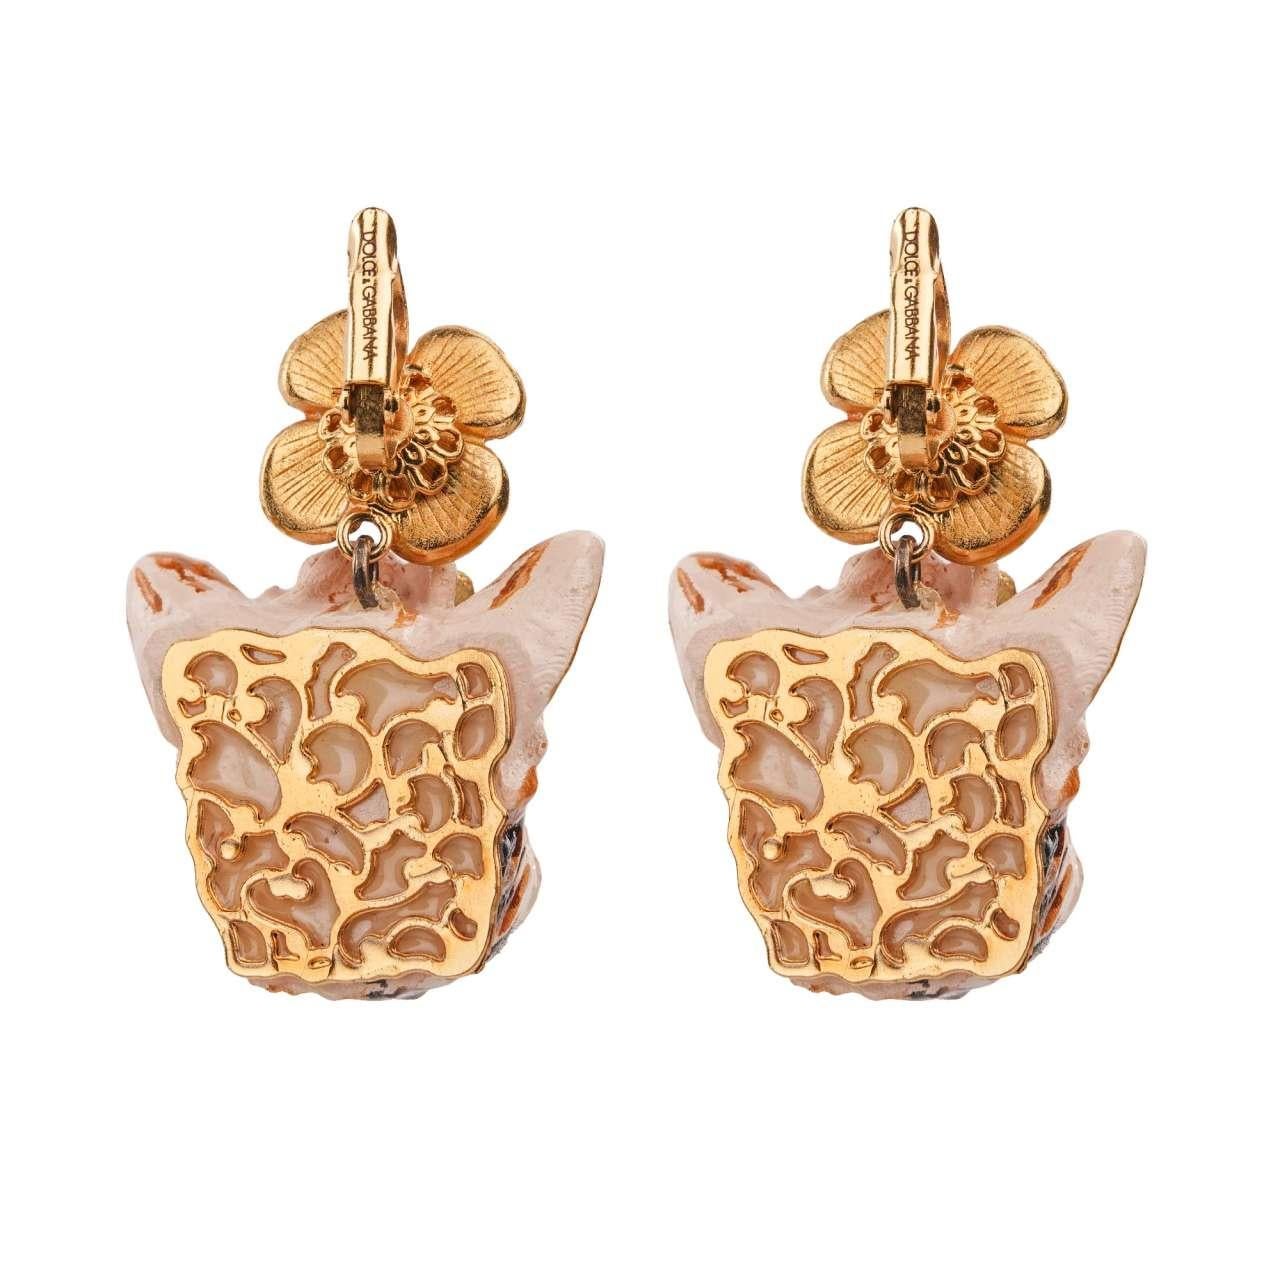 - Earrings with hand-painted terrier dog and flowers in gold by DOLCE & GABBANA - RUNWAY - Dolce & Gabbana Fashion Show - New with Box - Made in Italy - Gold-plated brass - Hook fastening - Nickel free - Model: WEK2C1-W1111-87579 - Material: 80%